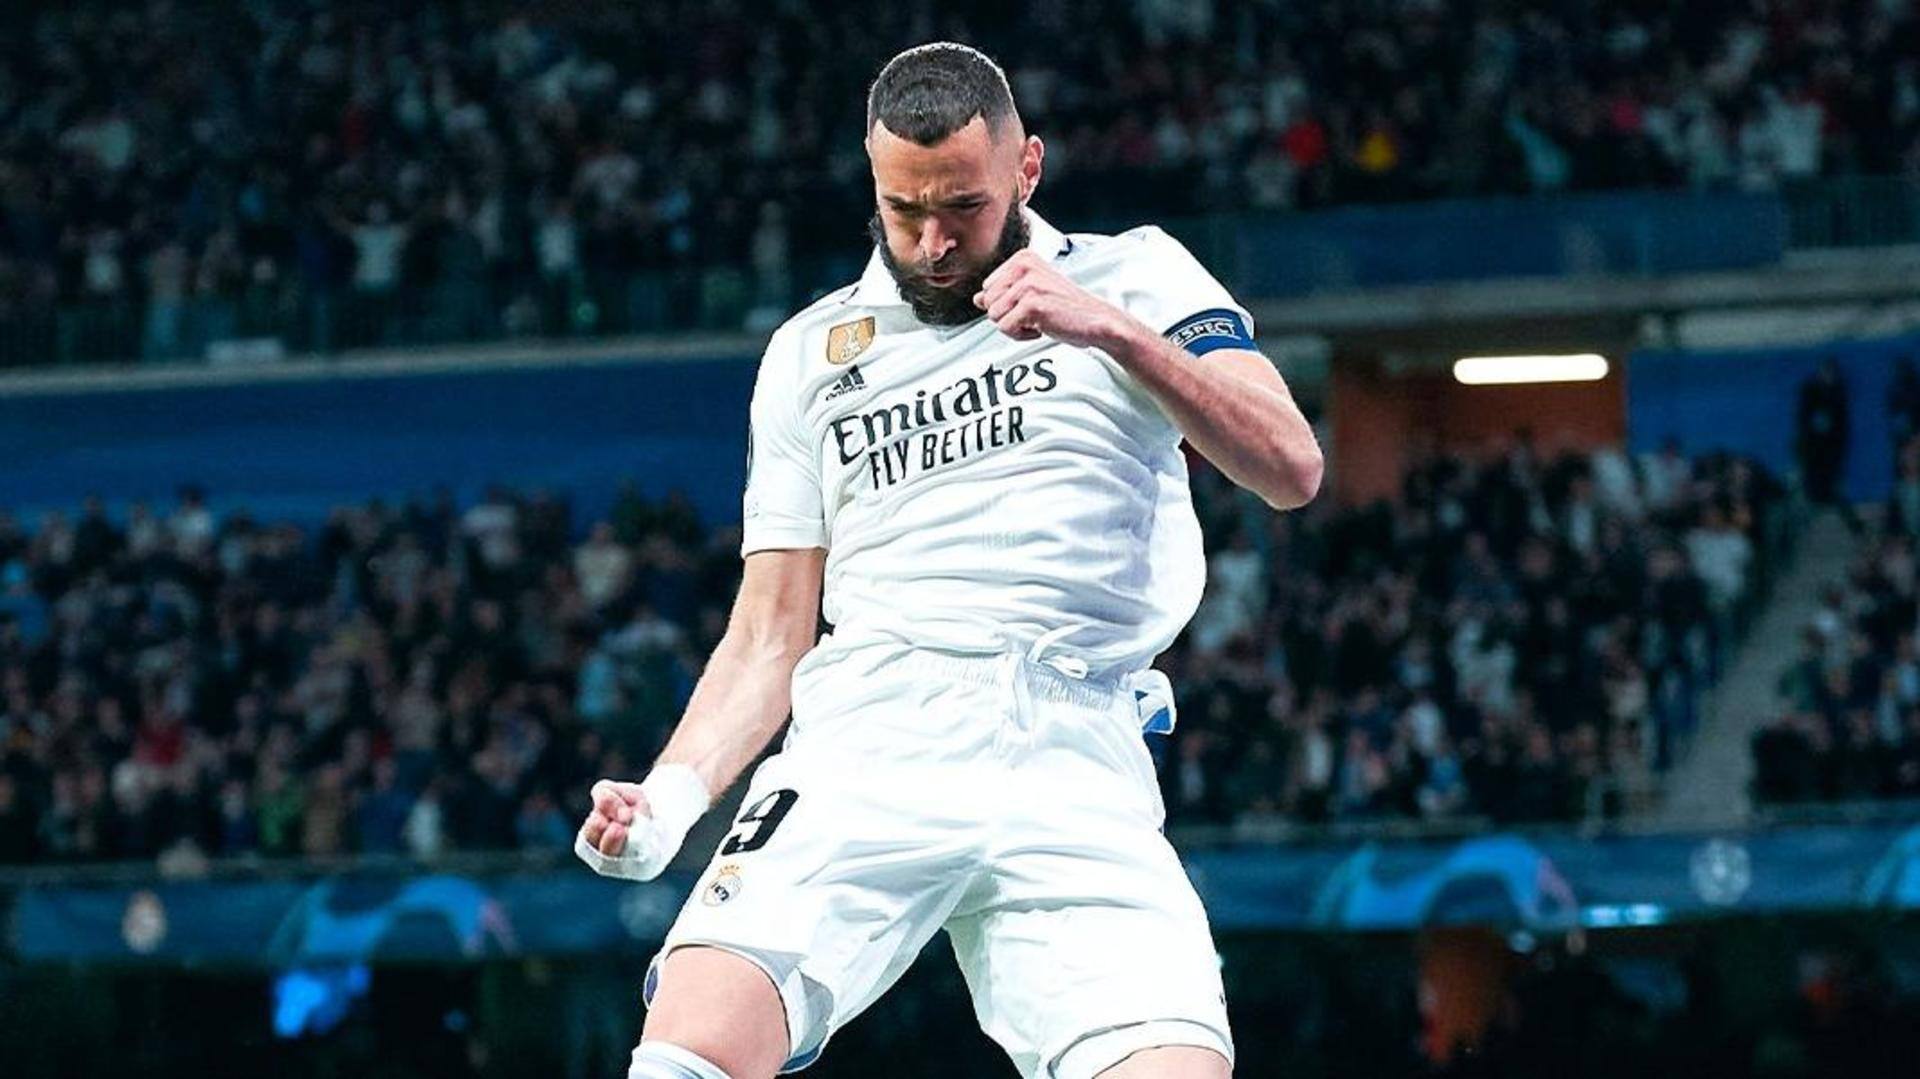 Champions League 2022-23, Real Madrid blank 10-man Chelsea 2-0: Stats